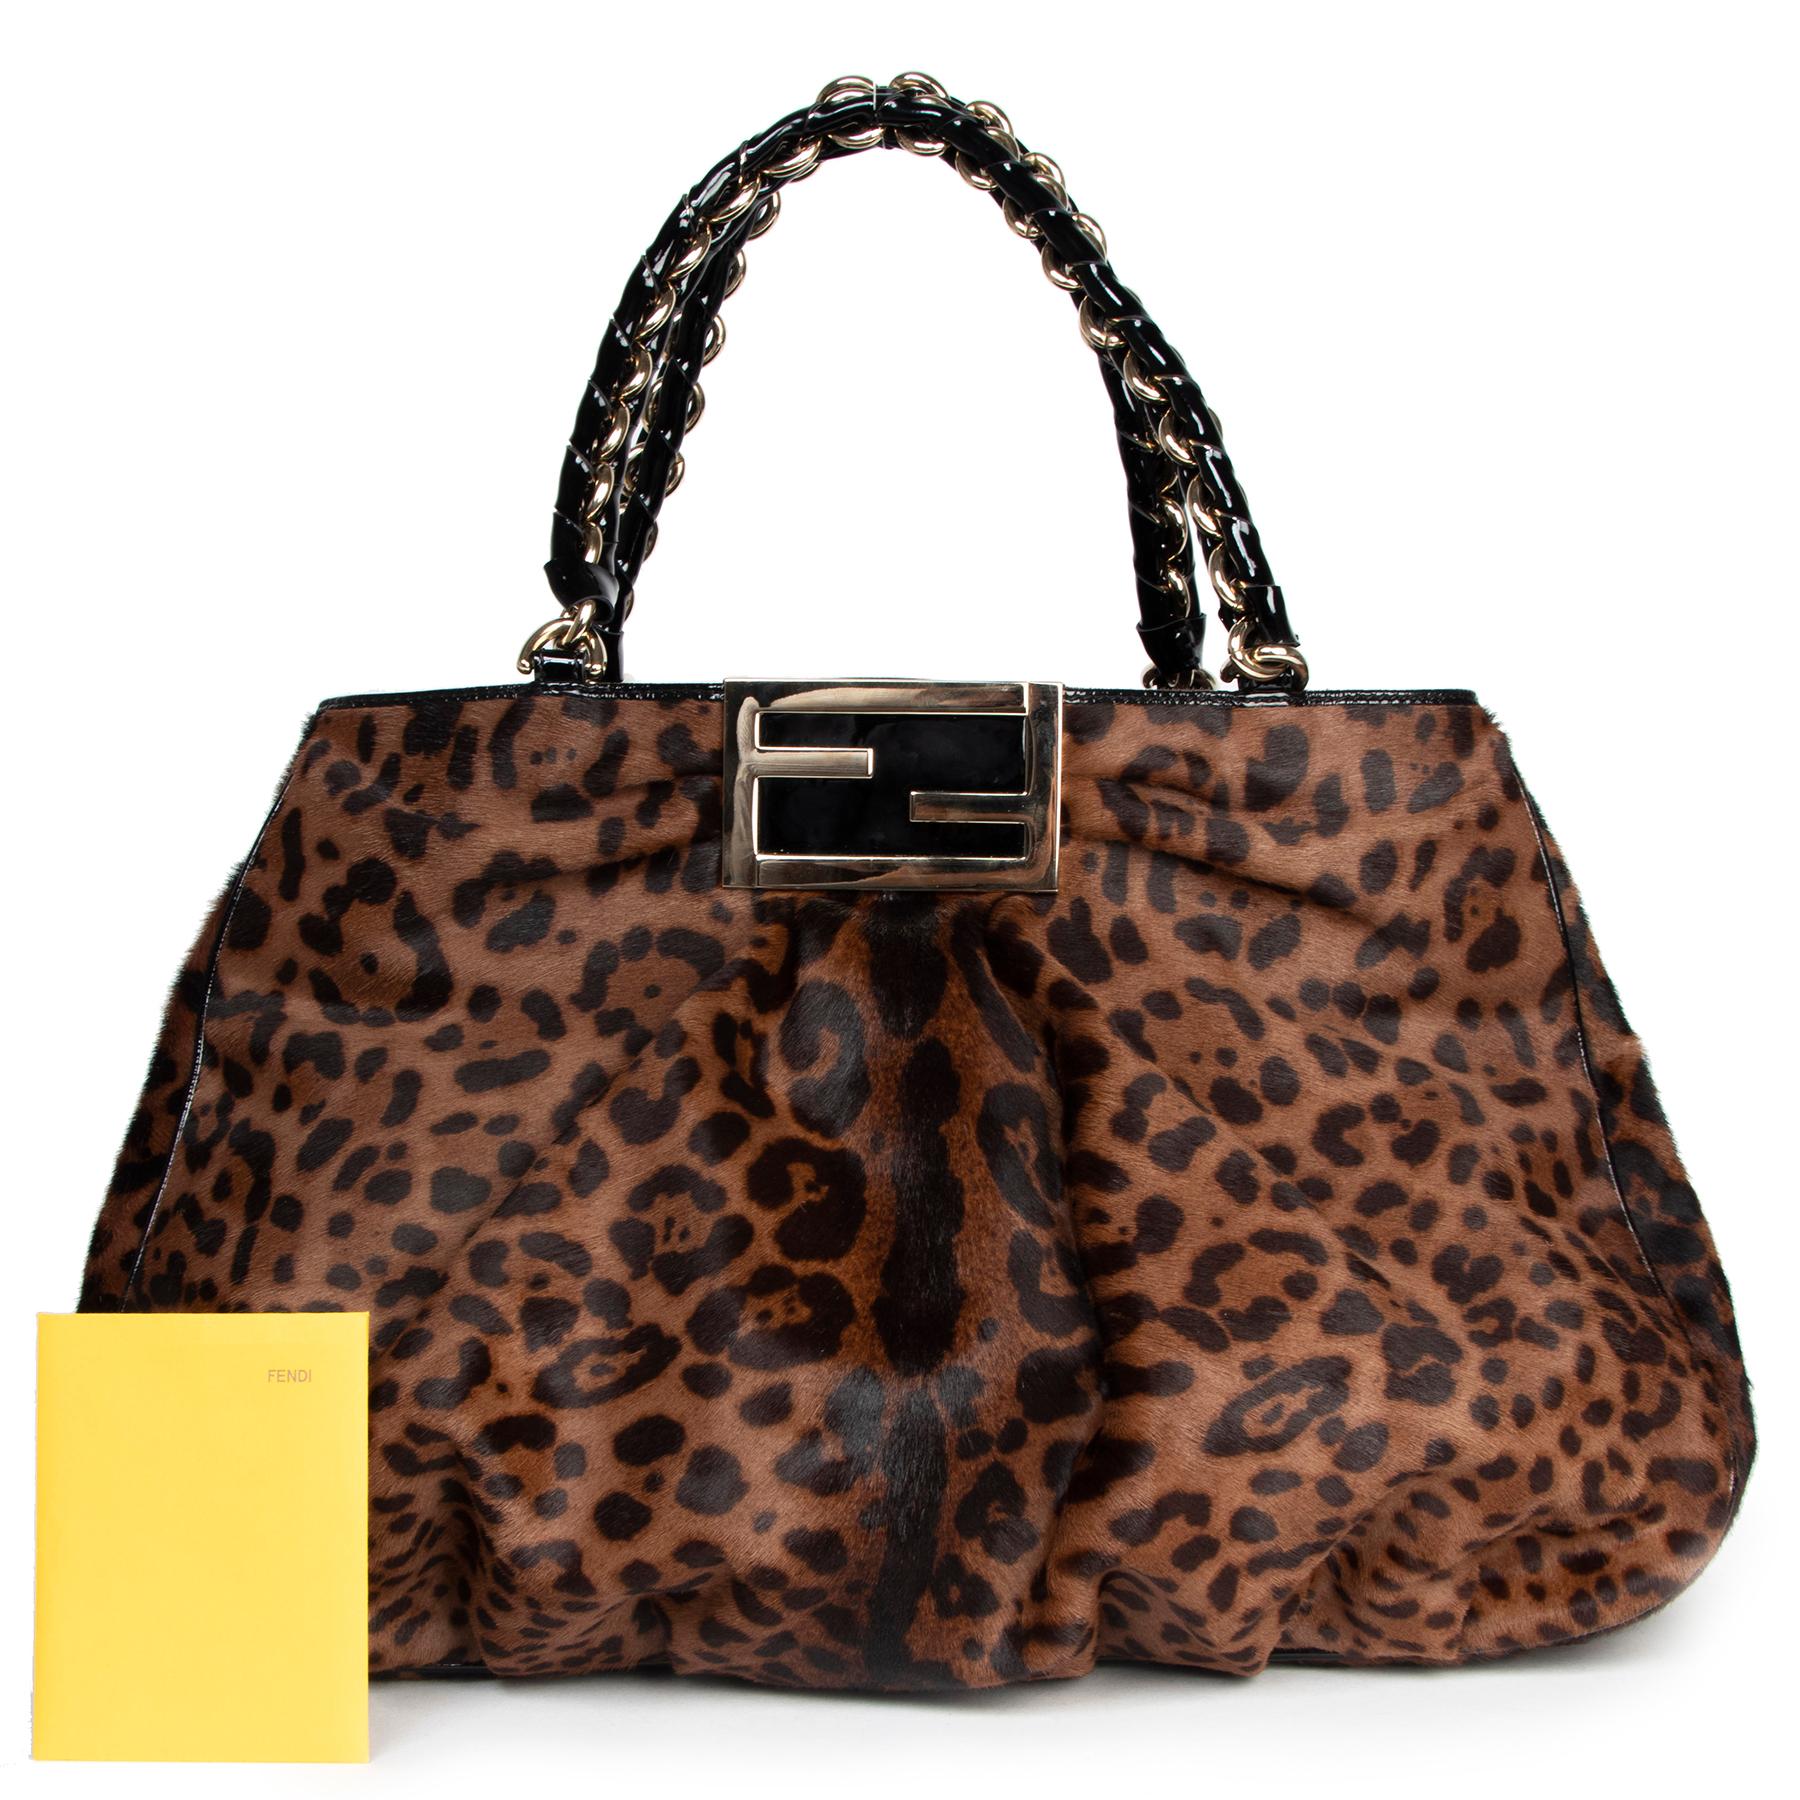 Very good preloved condition

Fendi Leopard Print Ponyhair Patent Leather Tote

This Leopard is ready to roam the streets with you, this beautiful bag in leopard print is crafted in luxurious ponyhair and finished with black dual braided patent